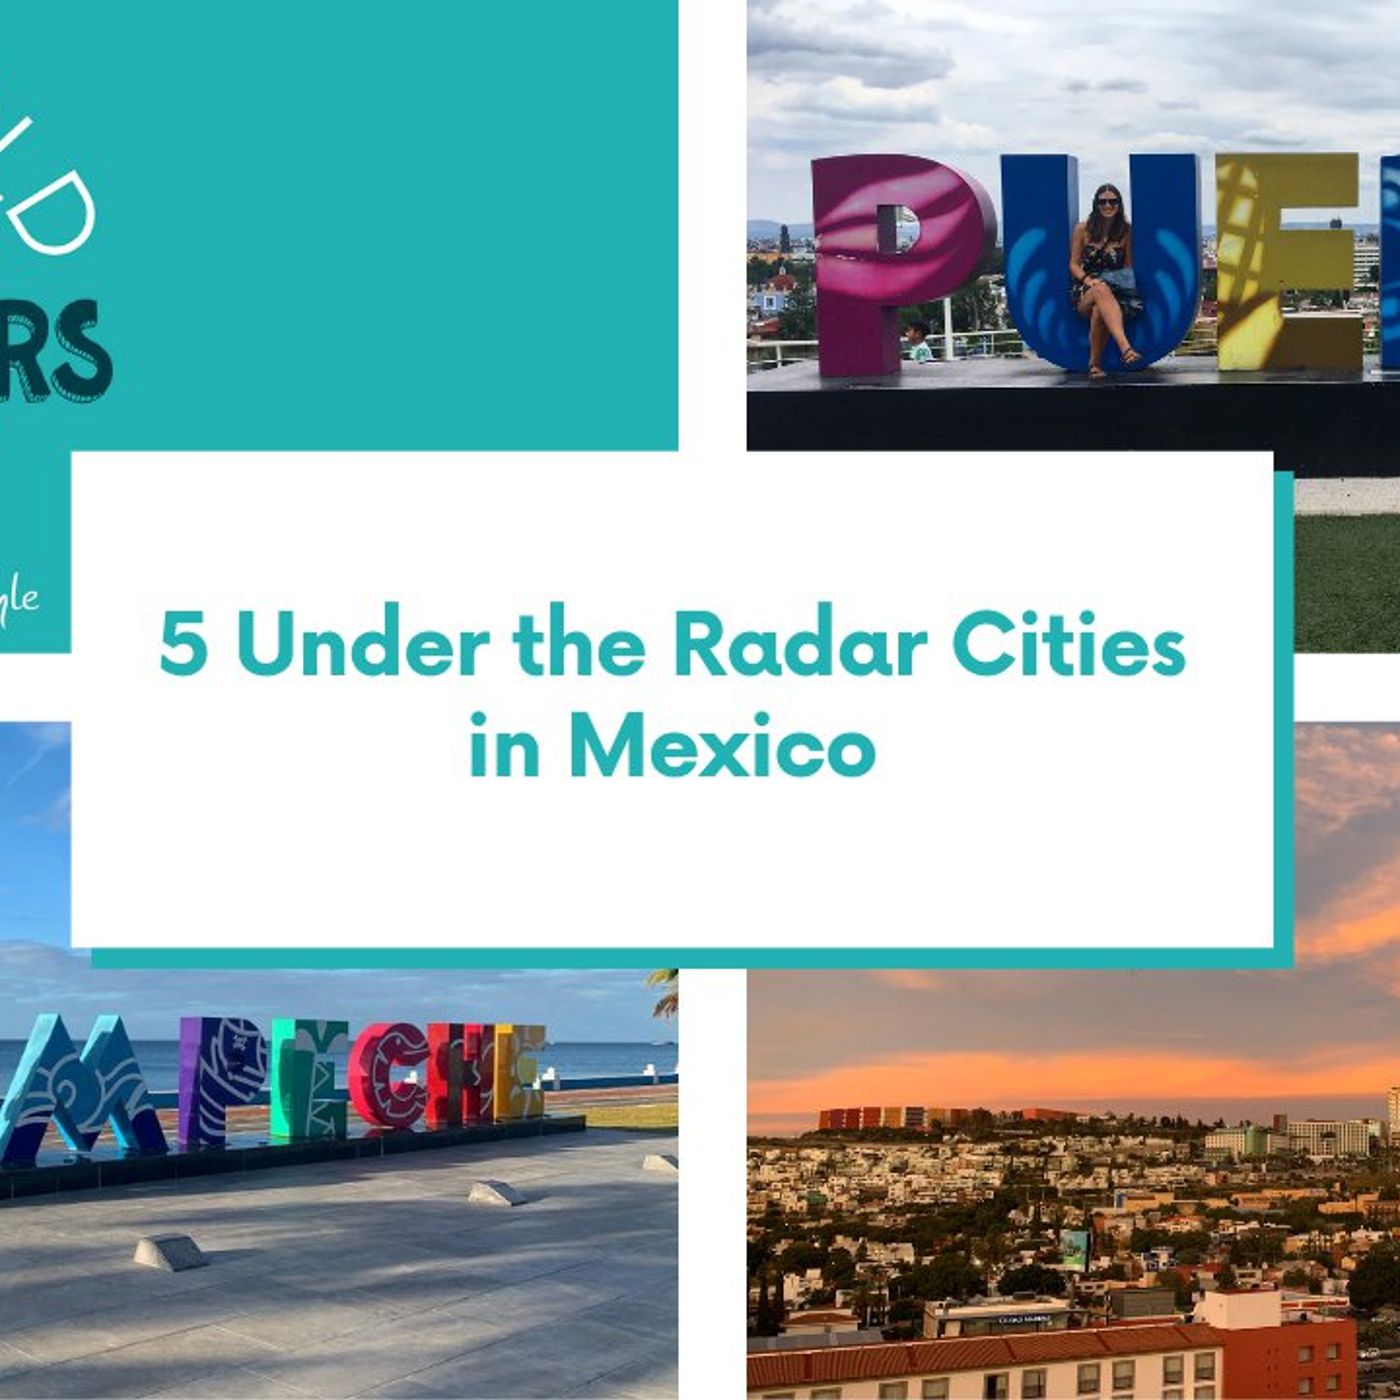 5 Under the Radar Cities in Mexico